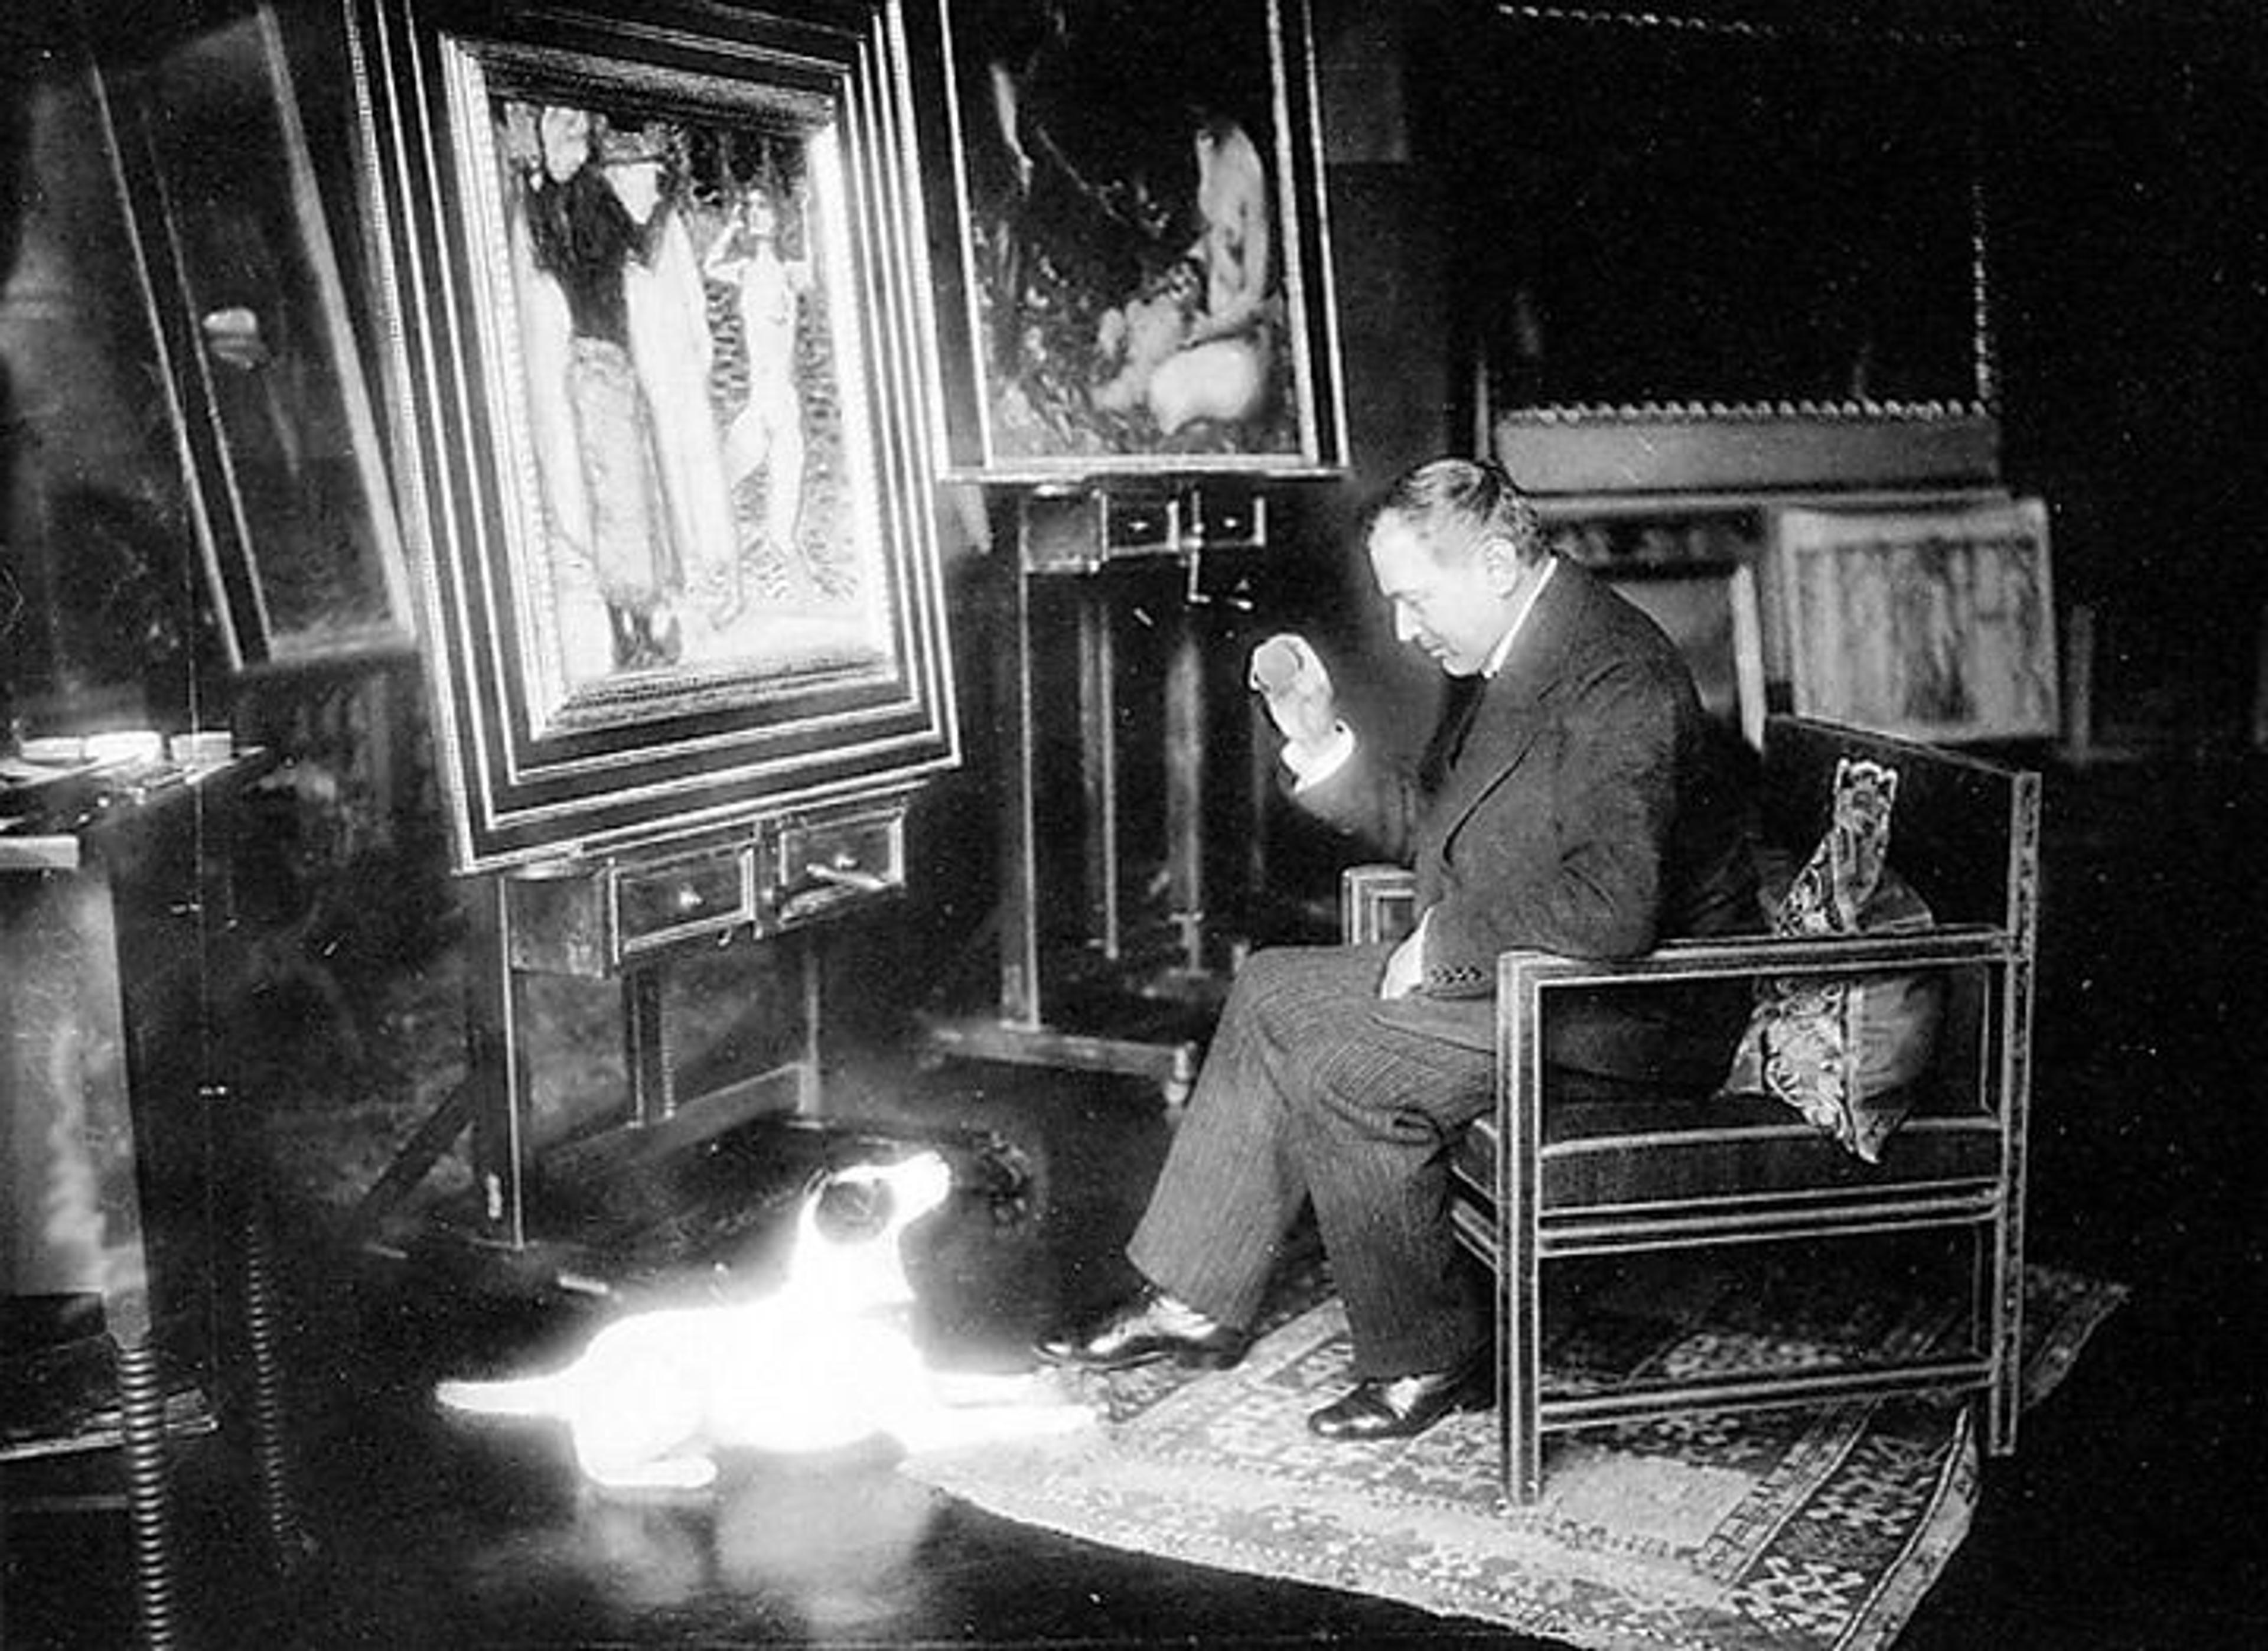 Black-and-white archival photo of the artist Franz von Stuck sitting in a chair in his studio while looking at a small white dog on the floor